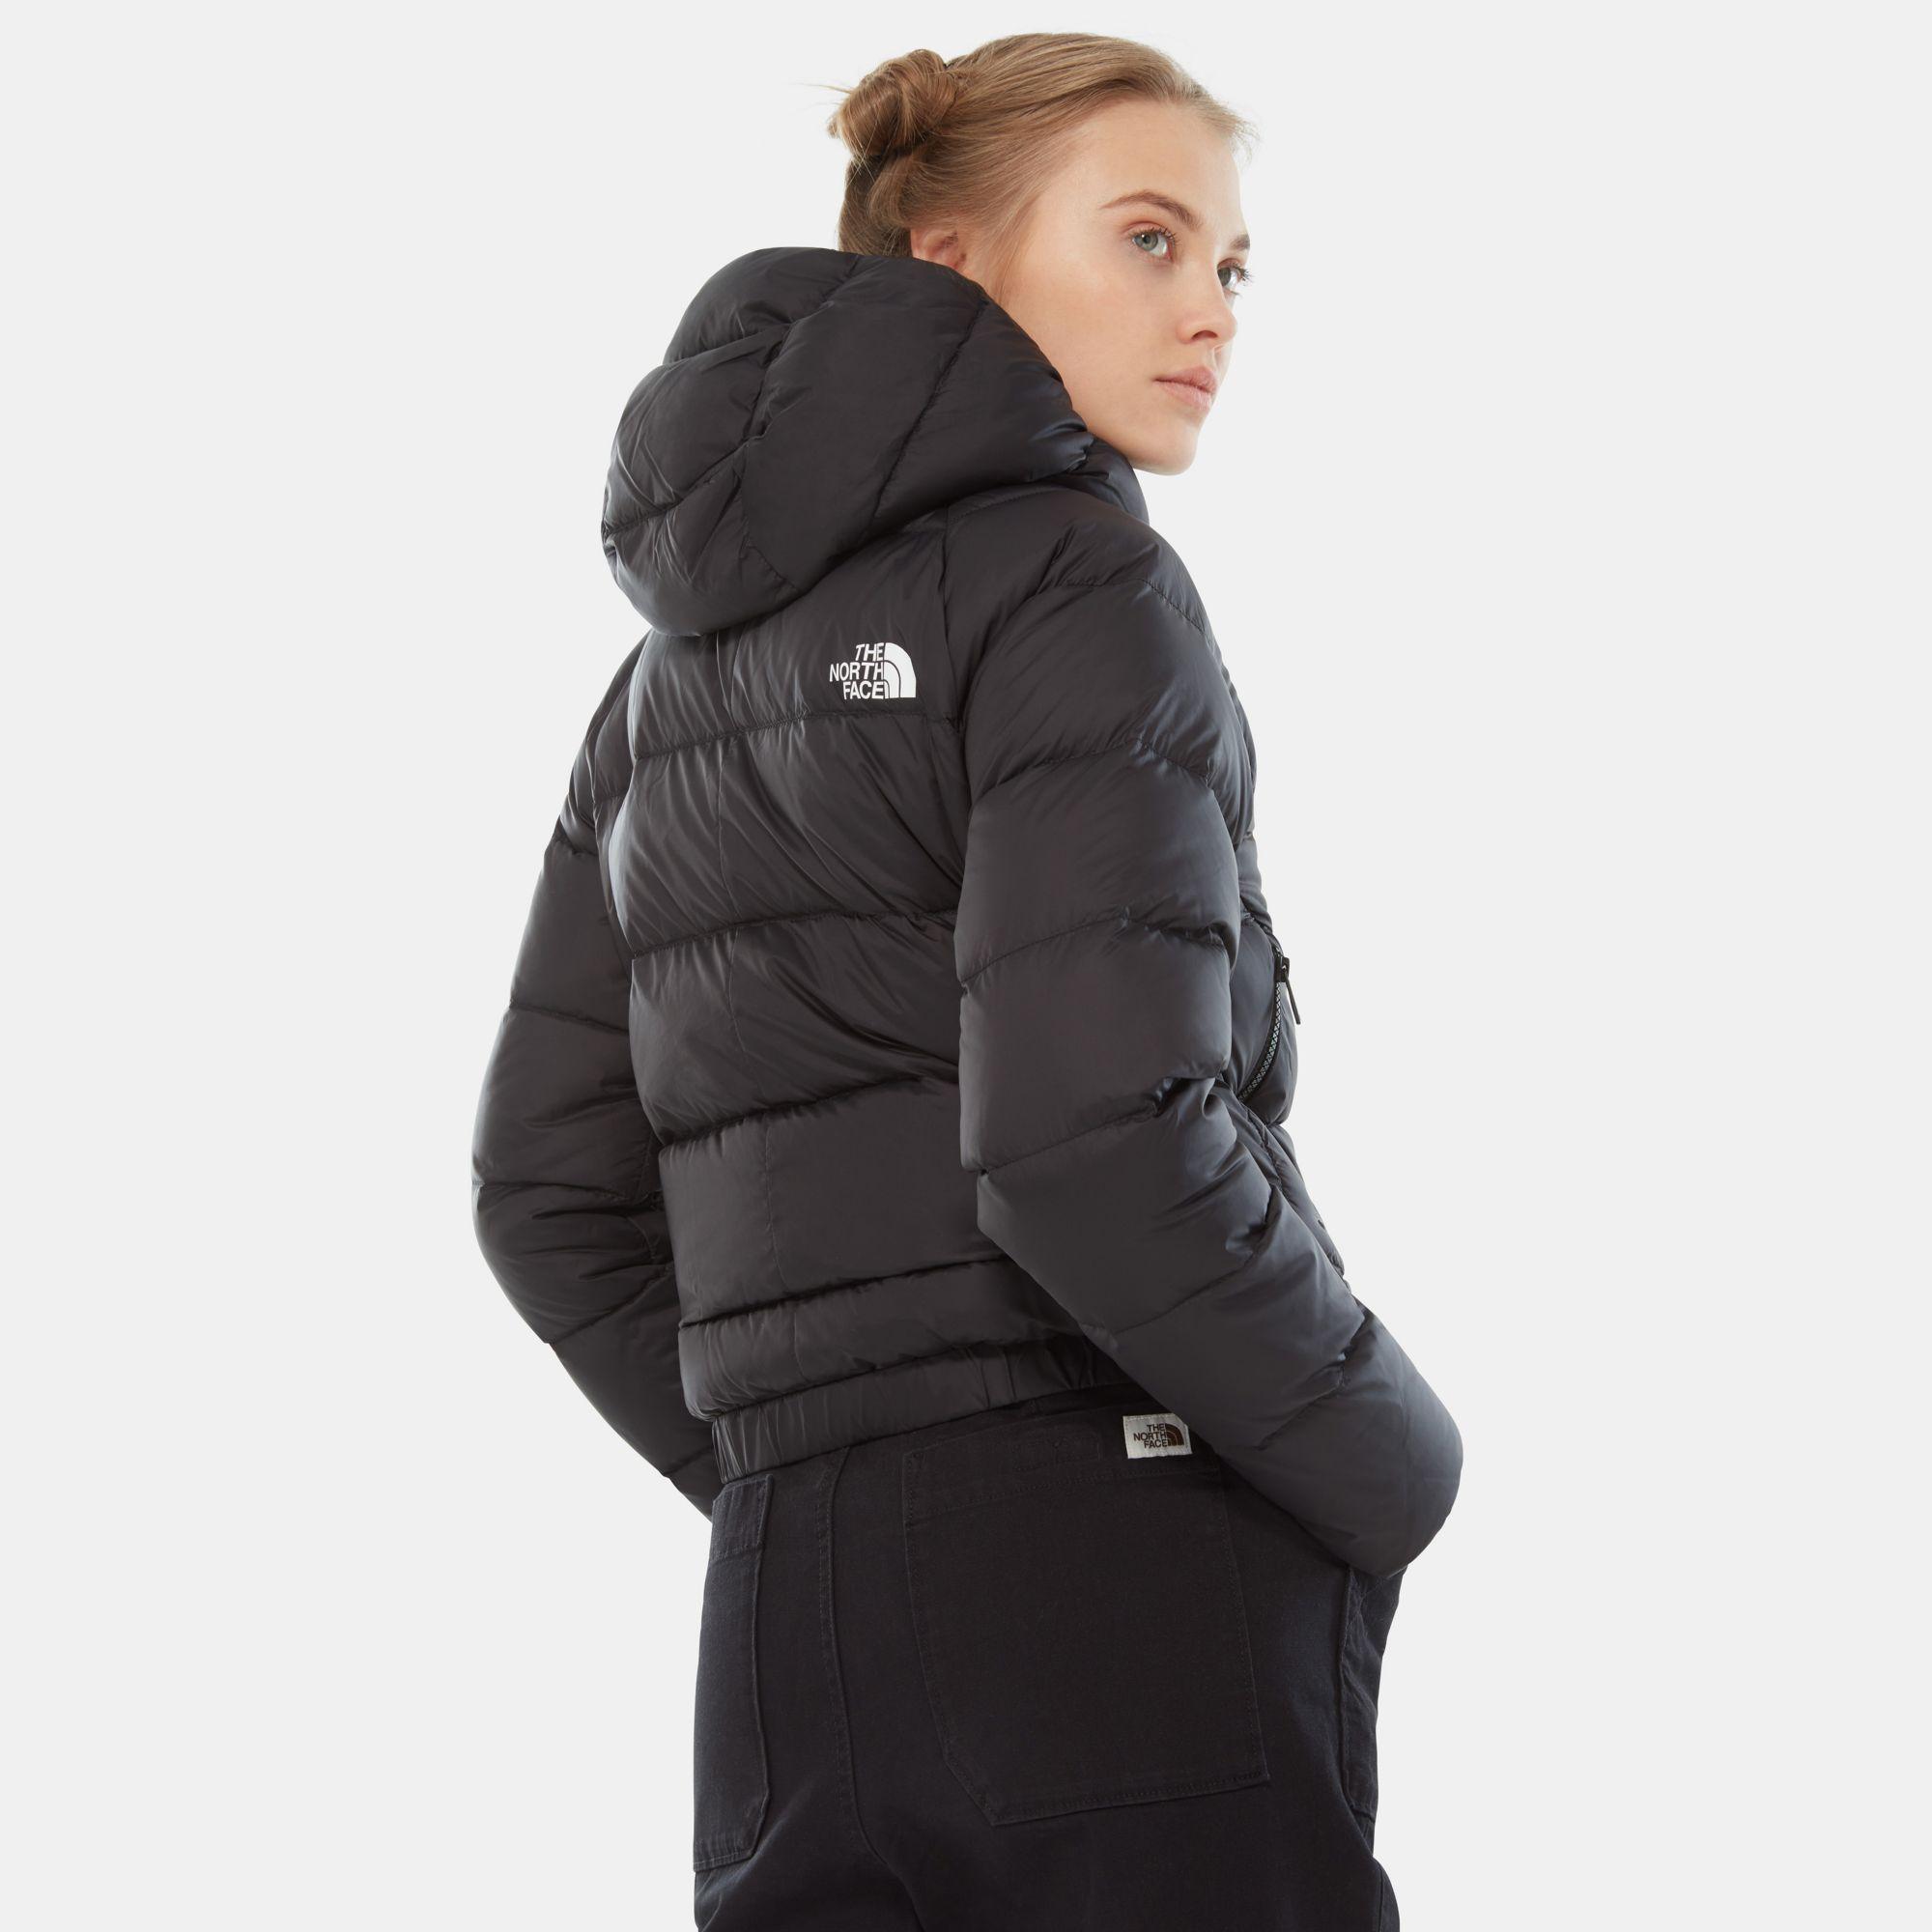 Women's Hyalite Down Jacket North Face Flash Sales, SAVE 44% -  eagleflair.com